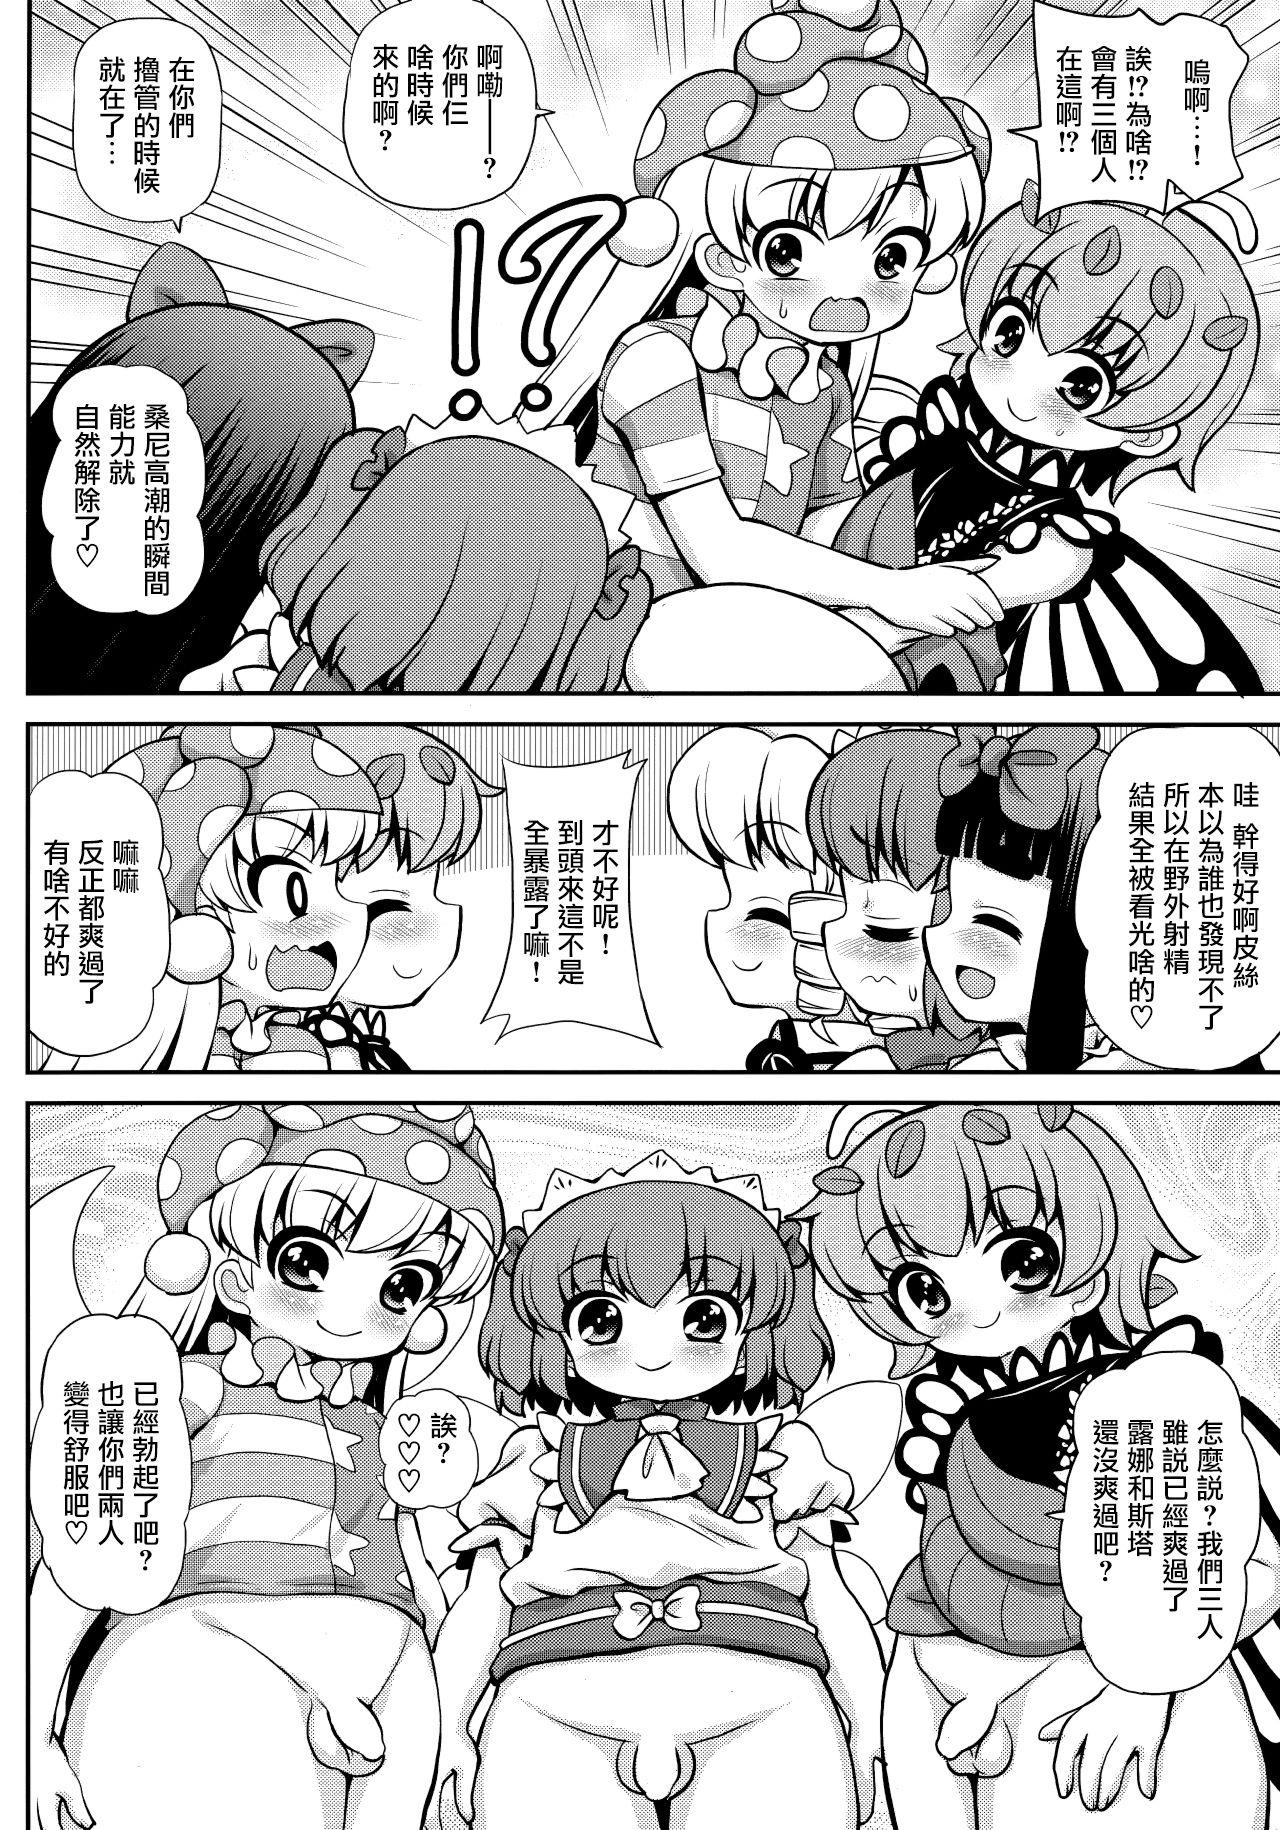 Chinese Quint Ejaculation - Touhou project Pink - Page 10